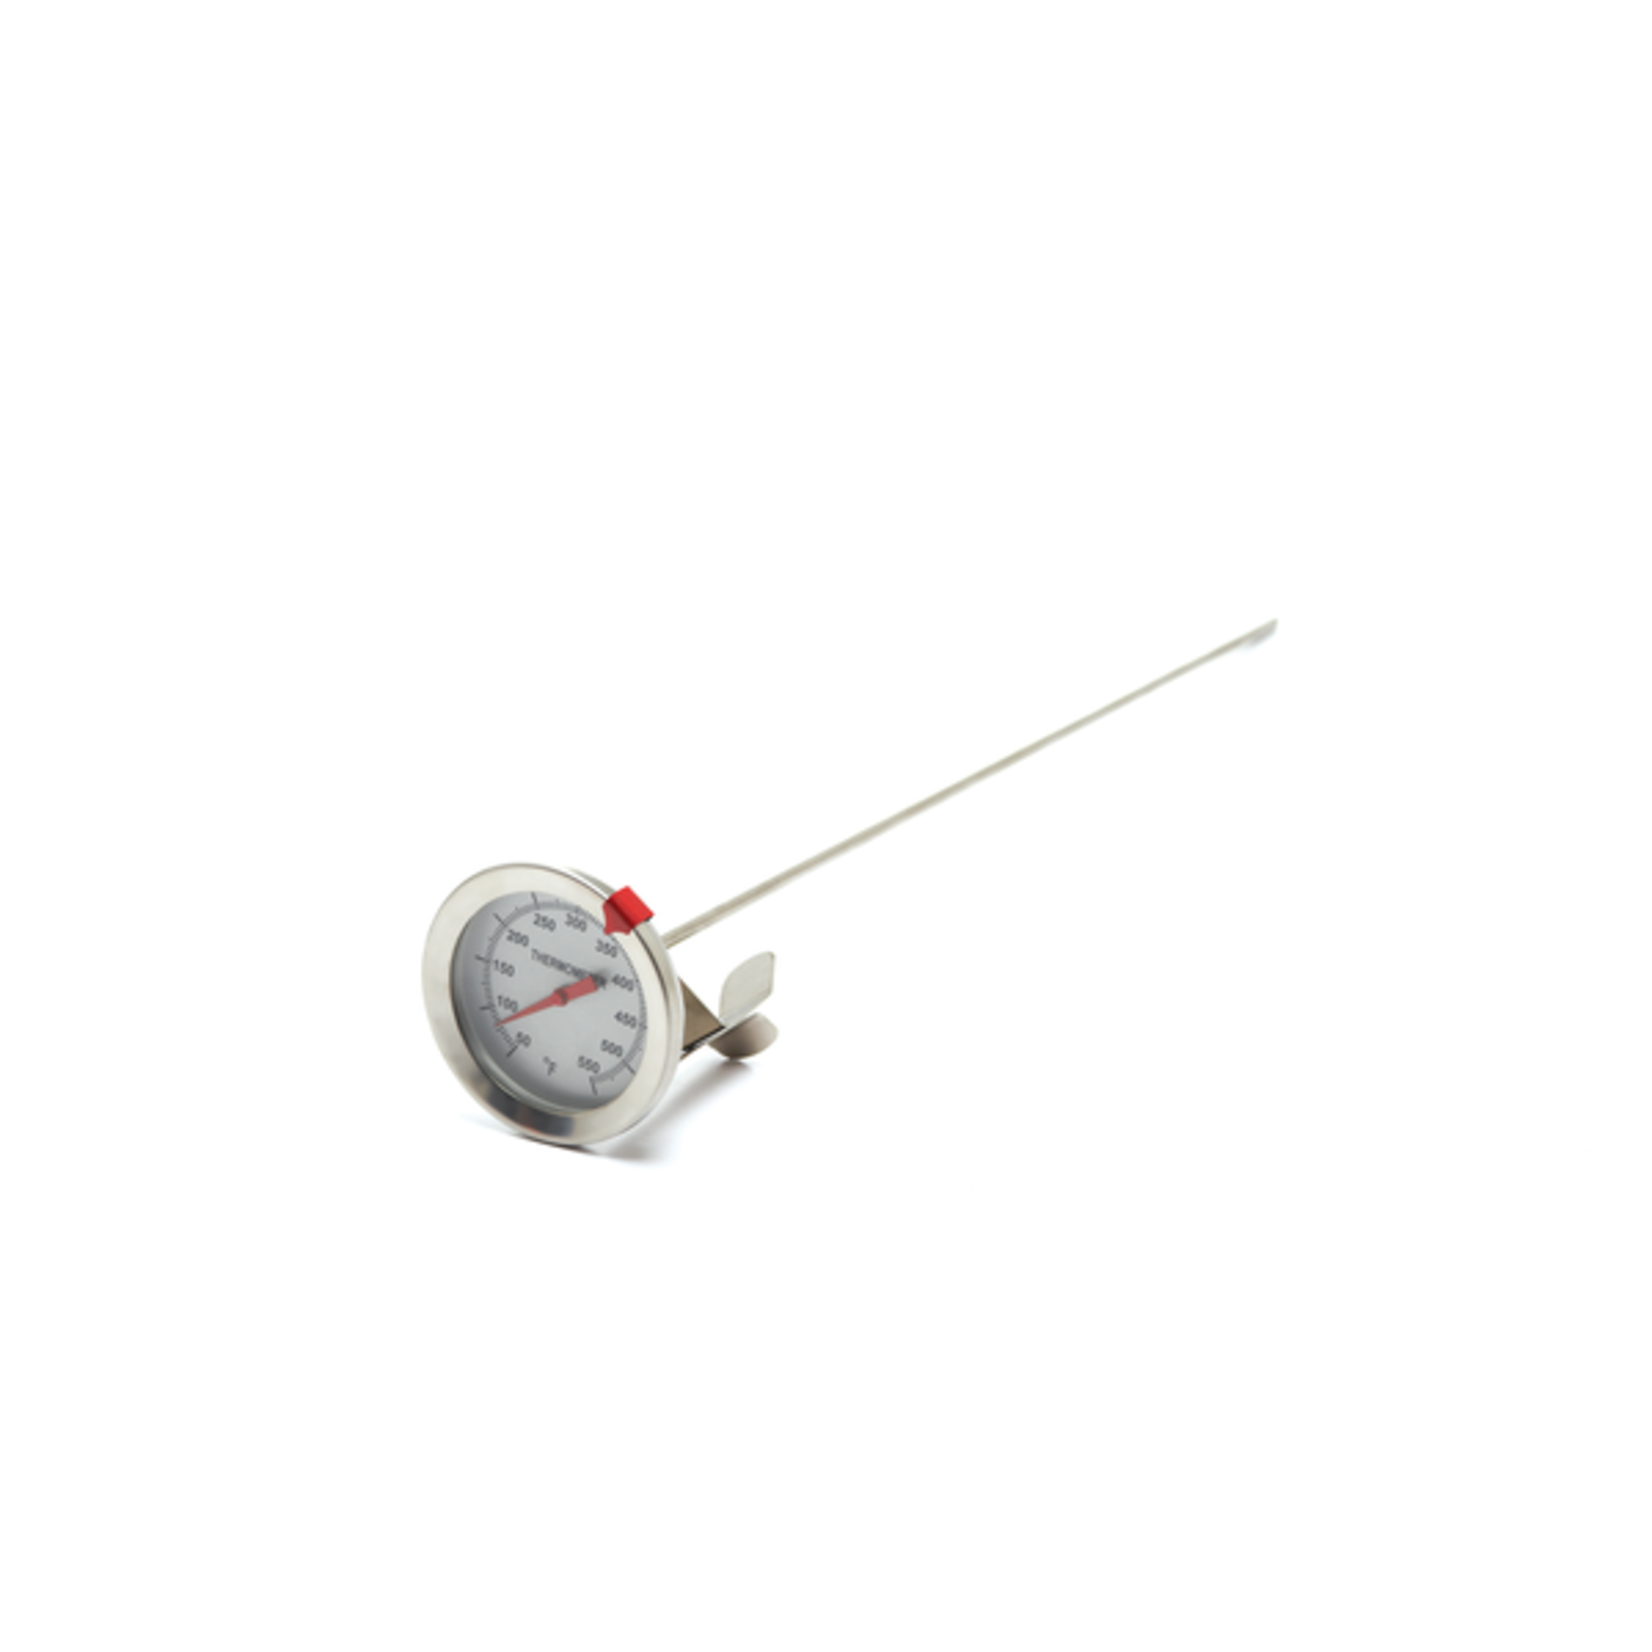 GrillPro Thermometer 12" for Smoke Houses / Deep Fryers